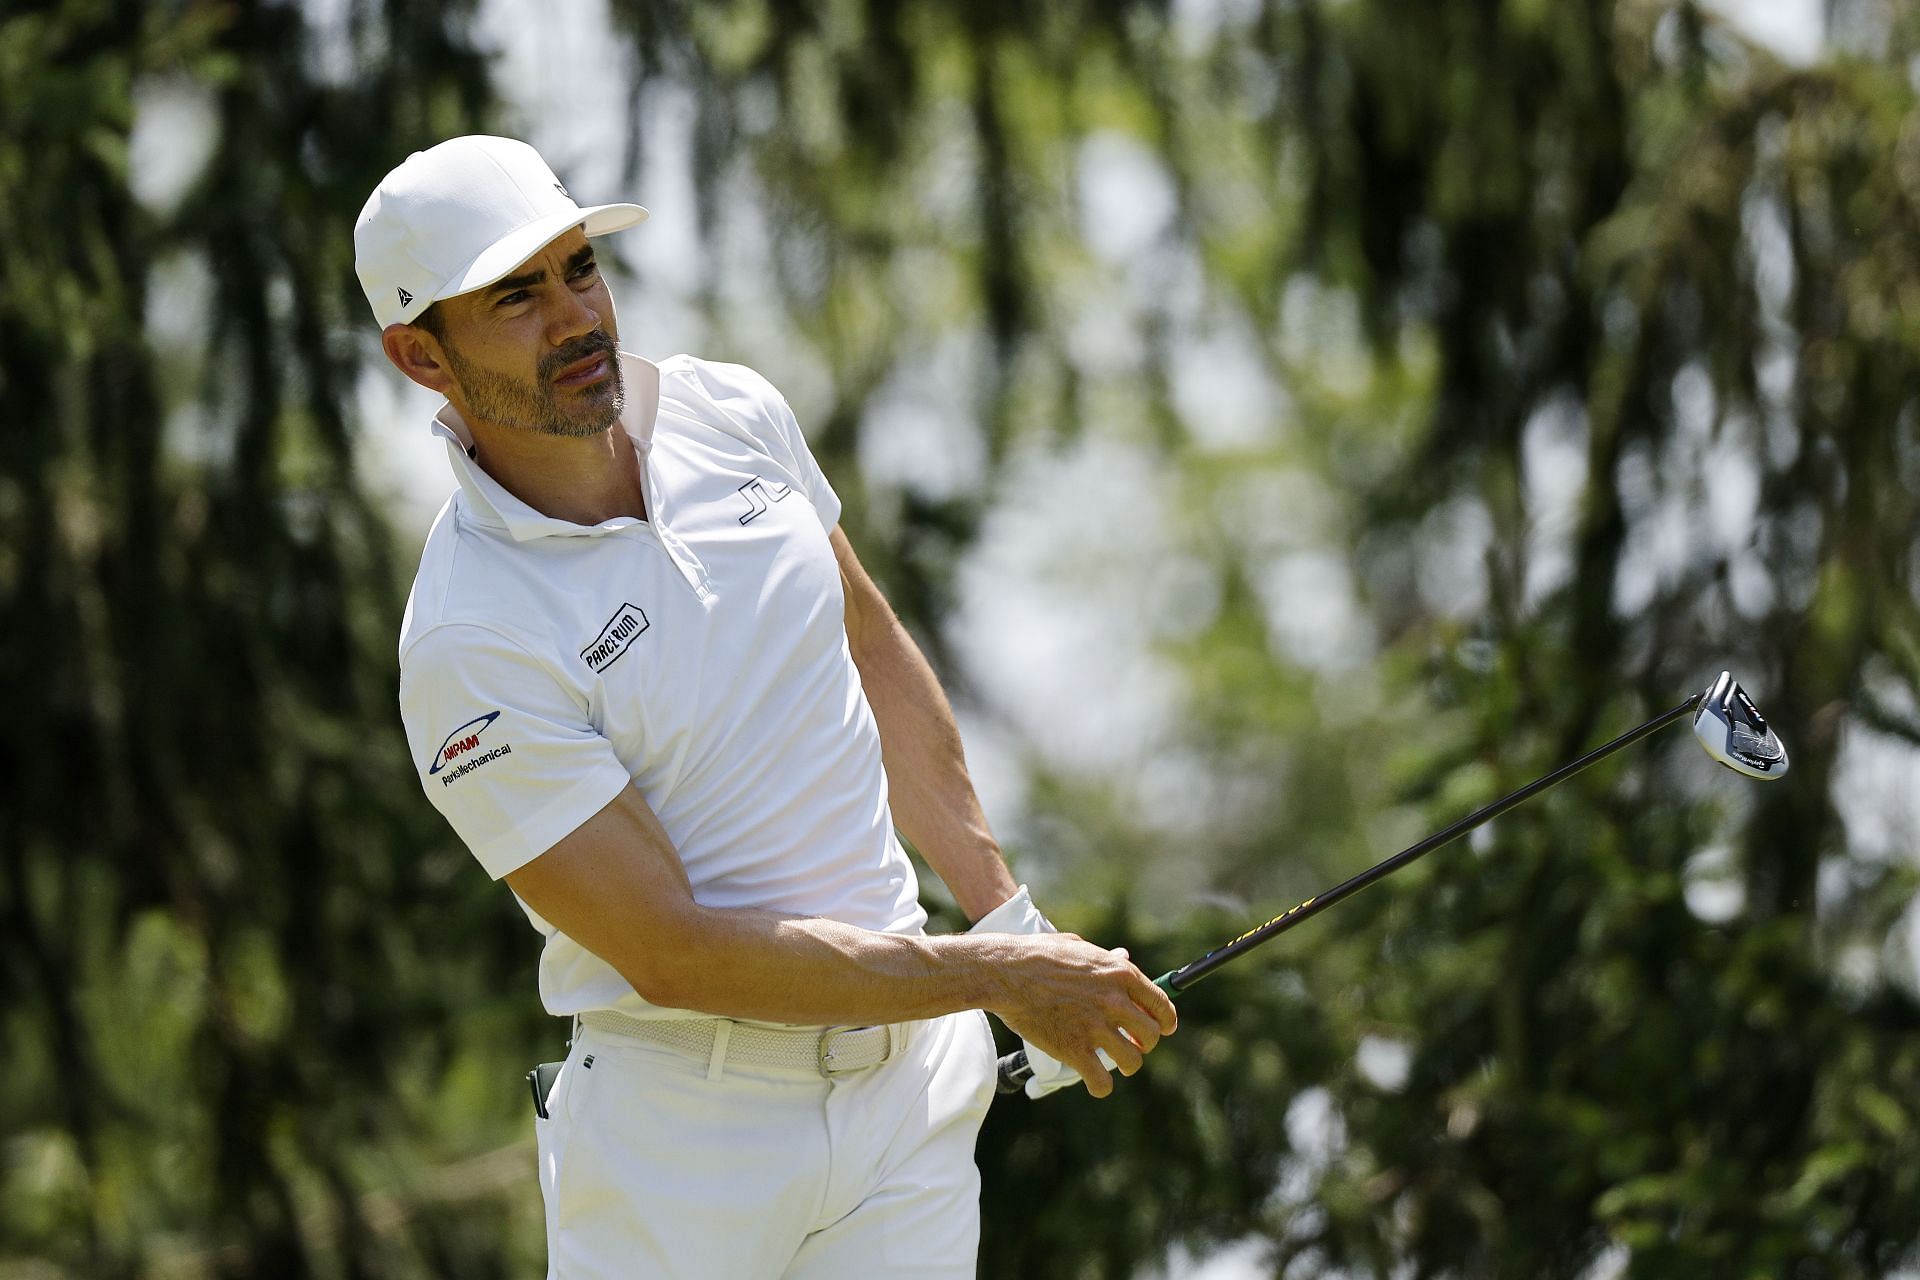 Camilo Villegas at the Price Cutter Charity Championship (via Getty Images)